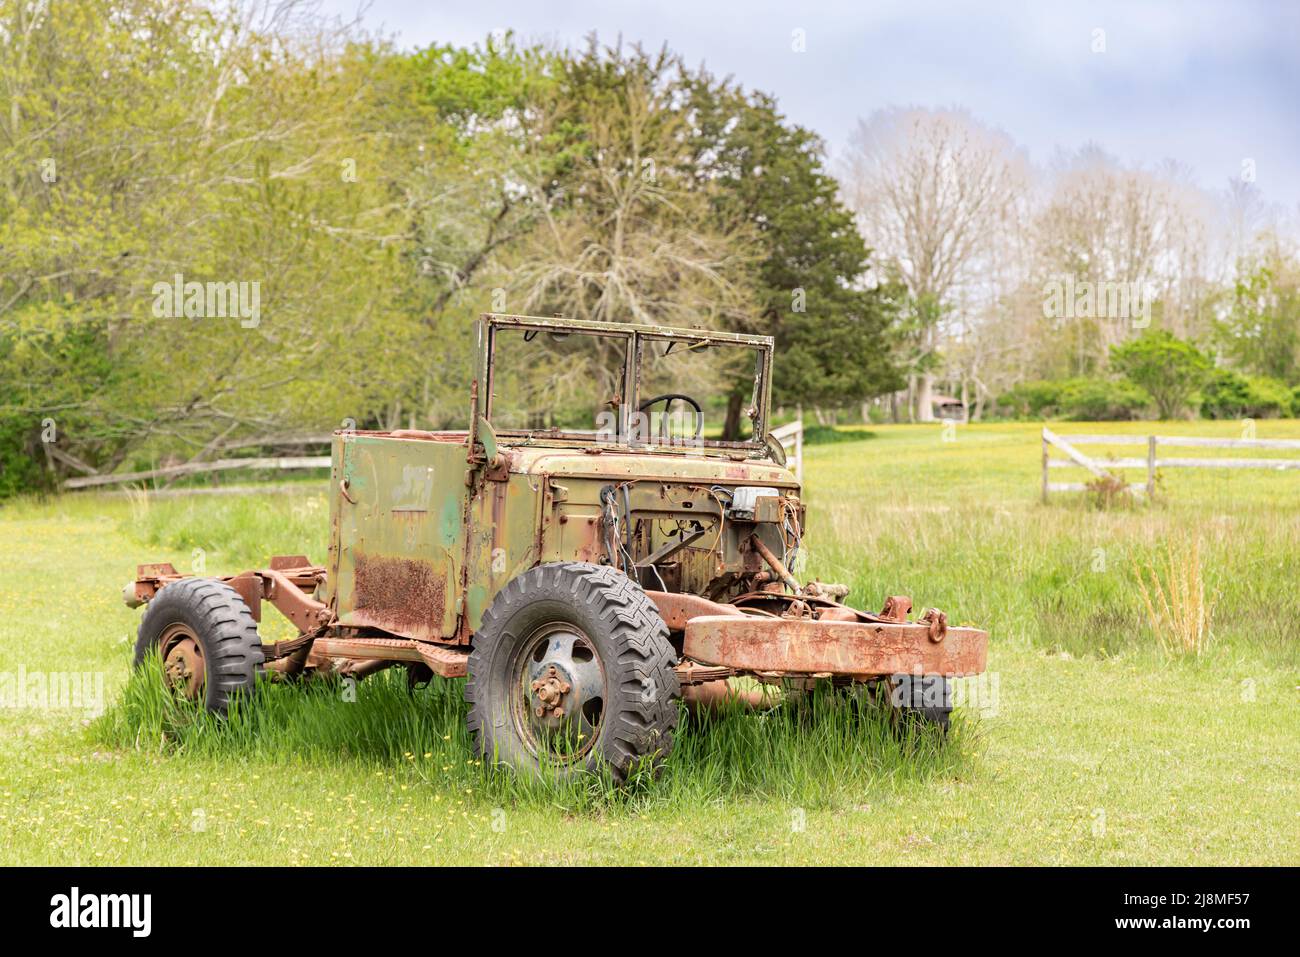 An old vehicle sitting in a green field Stock Photo